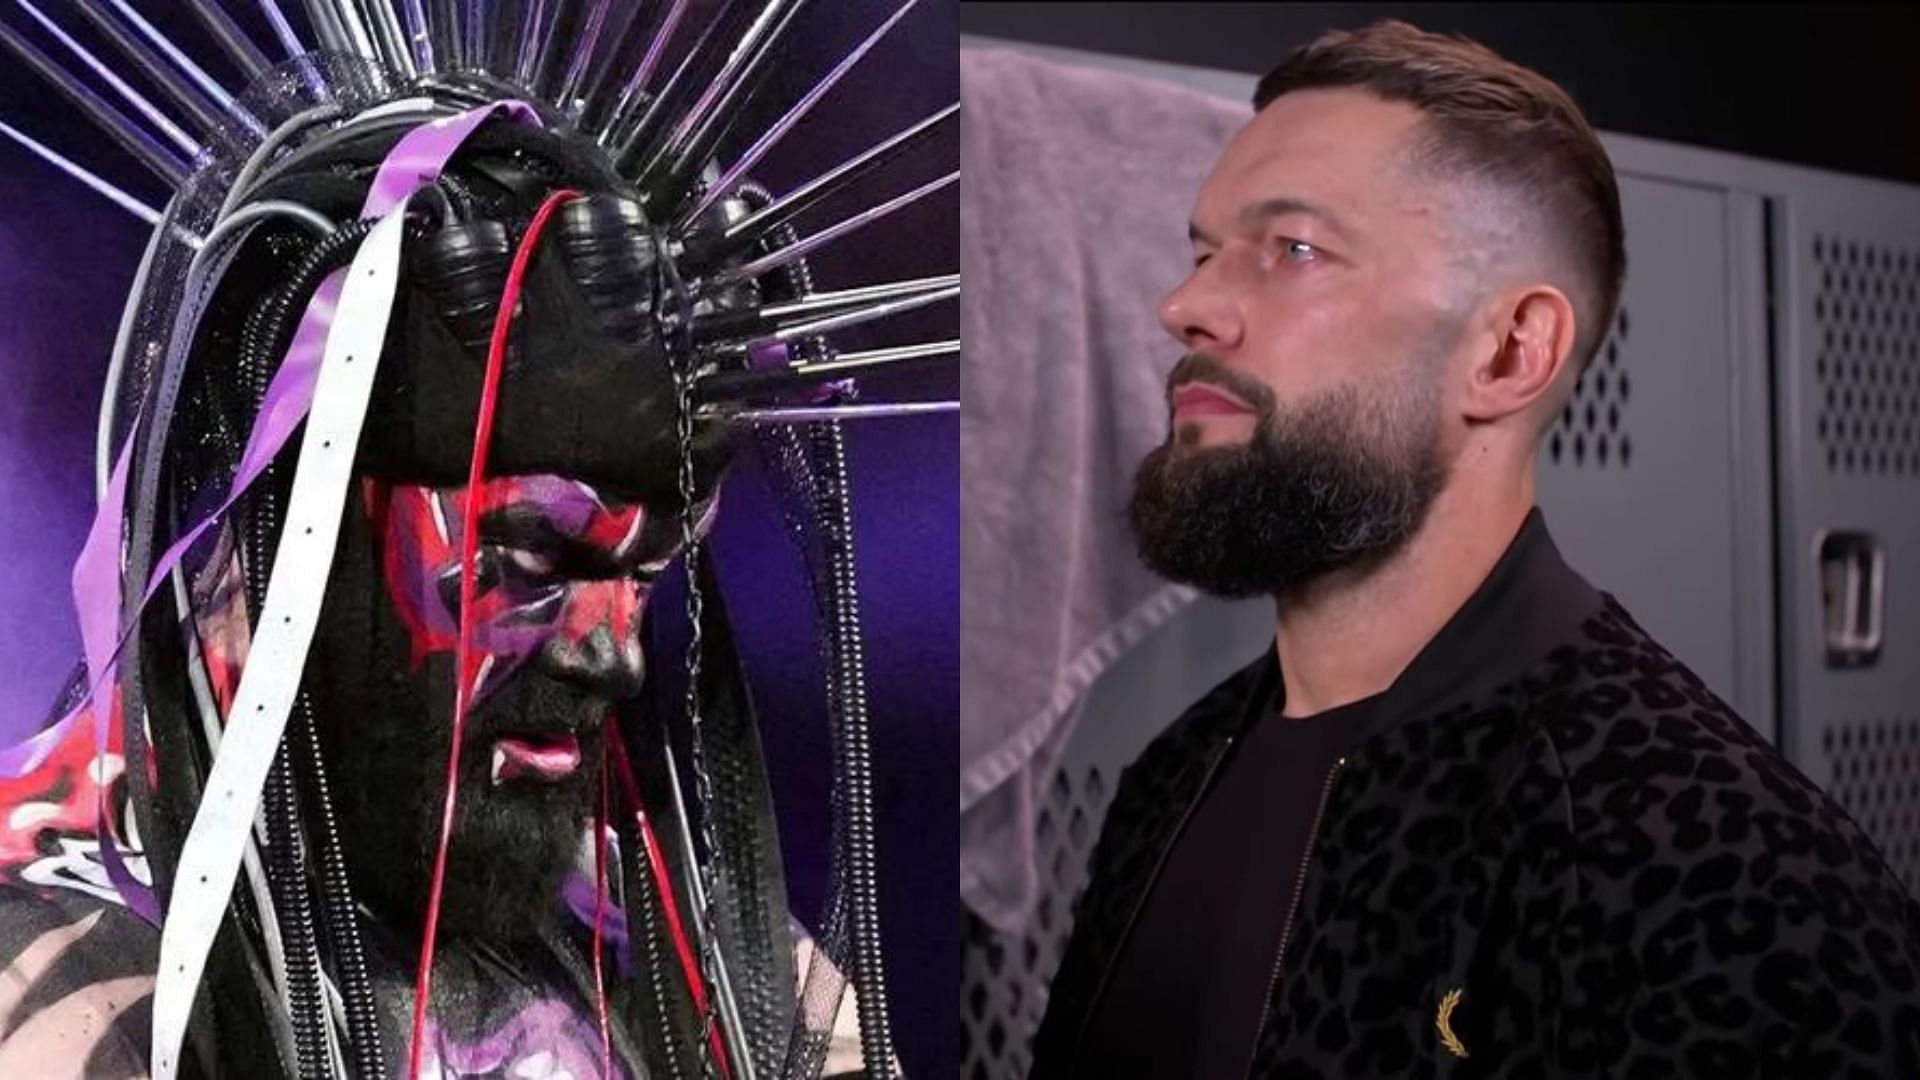 Finn Balor is scheduled to challenge for the World Heavyweight Title